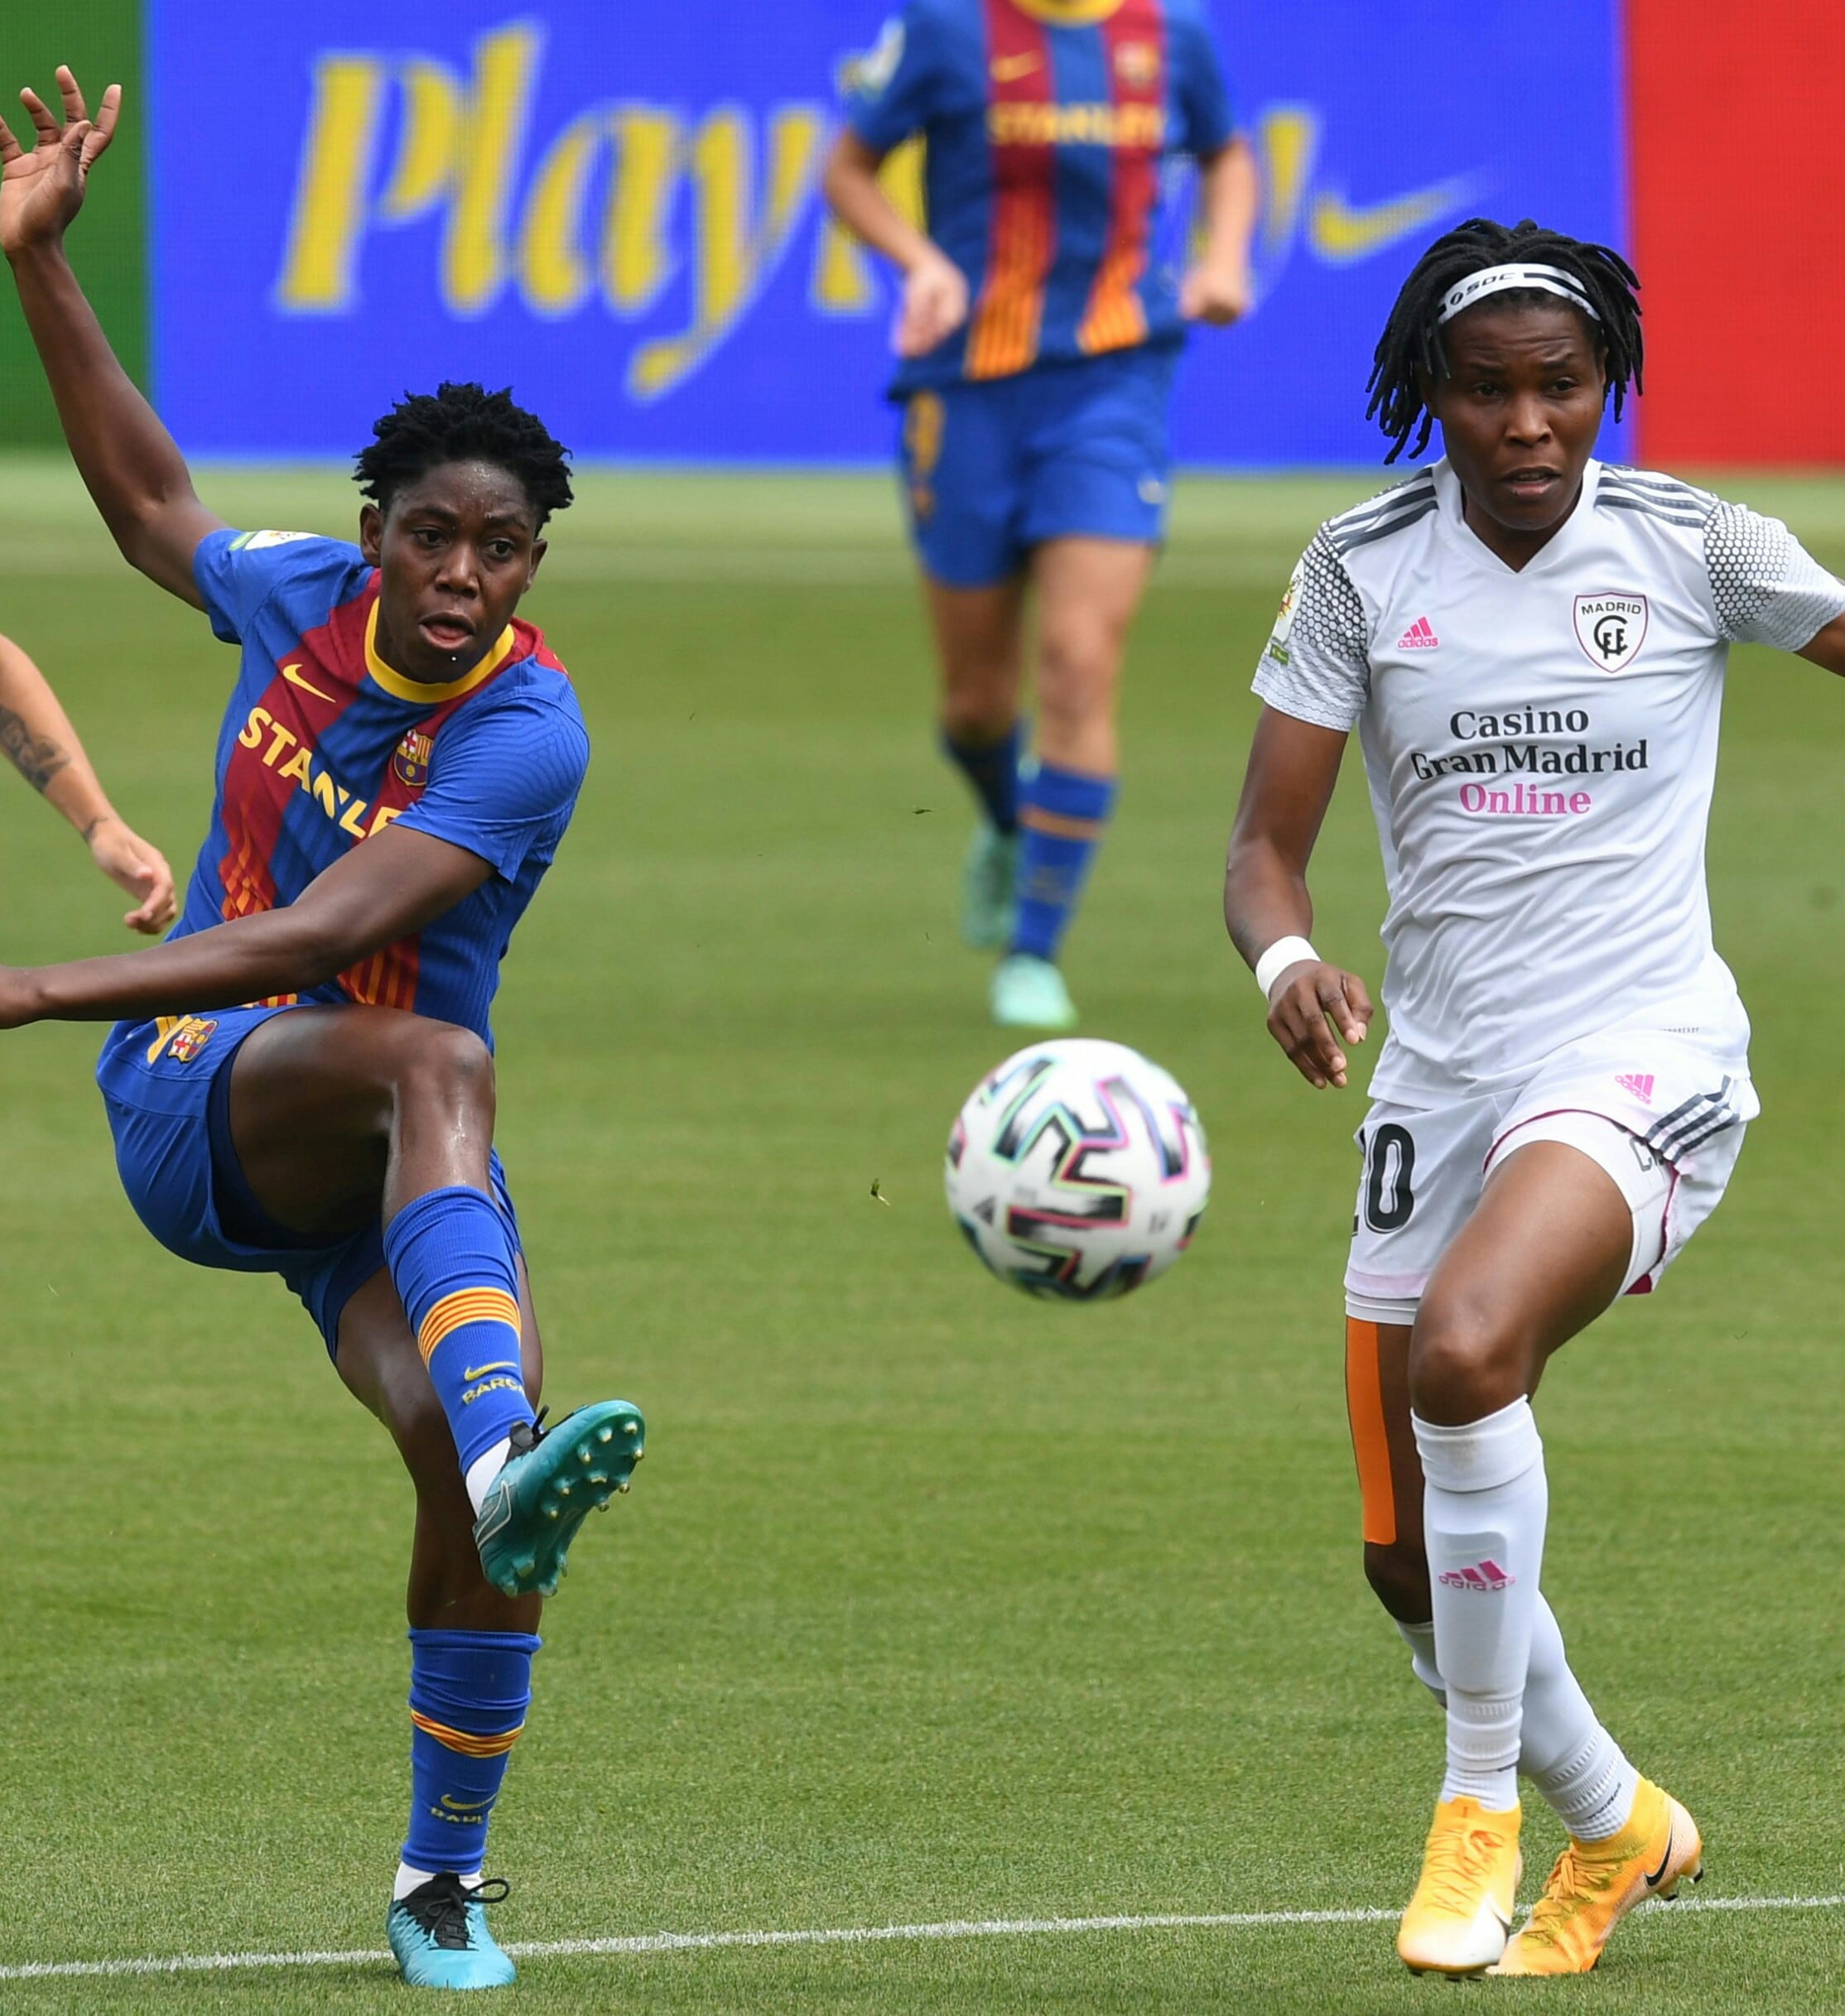 Falcons Star Ohale Scores, Oshoala, Chikwelu In Action As Barca Edge Madrid